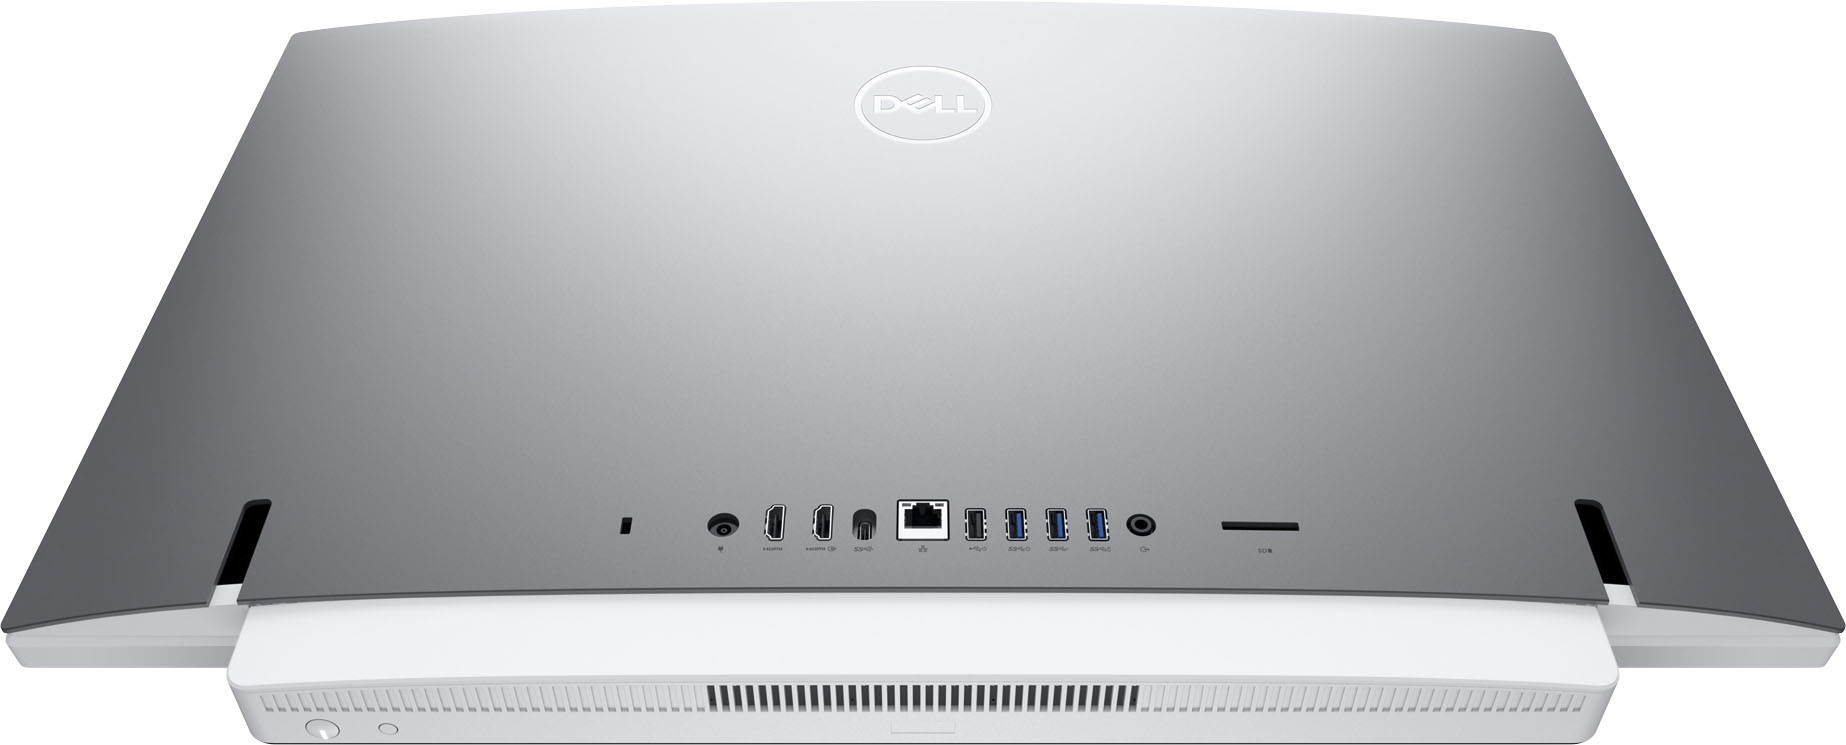 Back View: Dell - Inspiron 24" Touch-Screen All-In-One - Intel Core i3 - 8GB Memory - 256GB SSD - Black